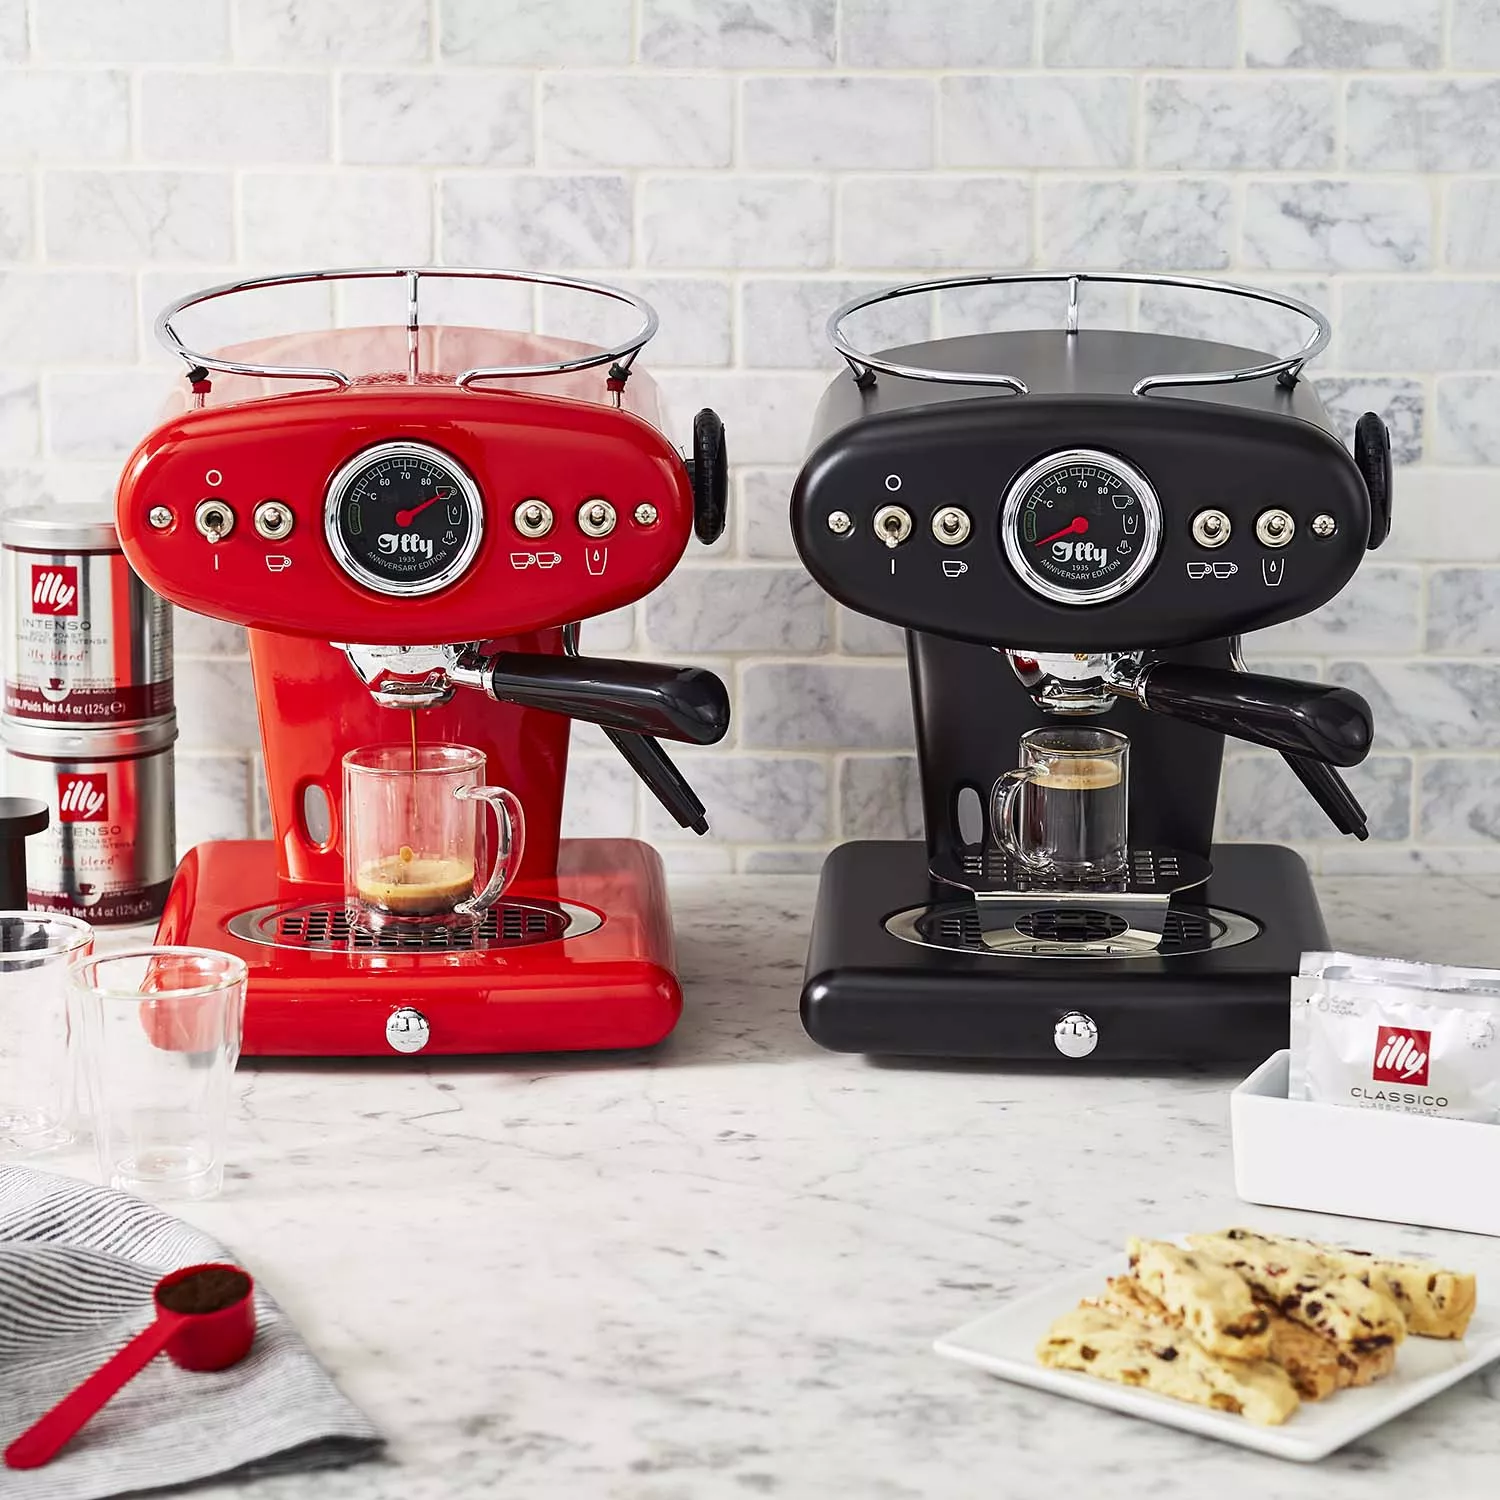 Ground Coffee Machines and Coffee Makers - illy